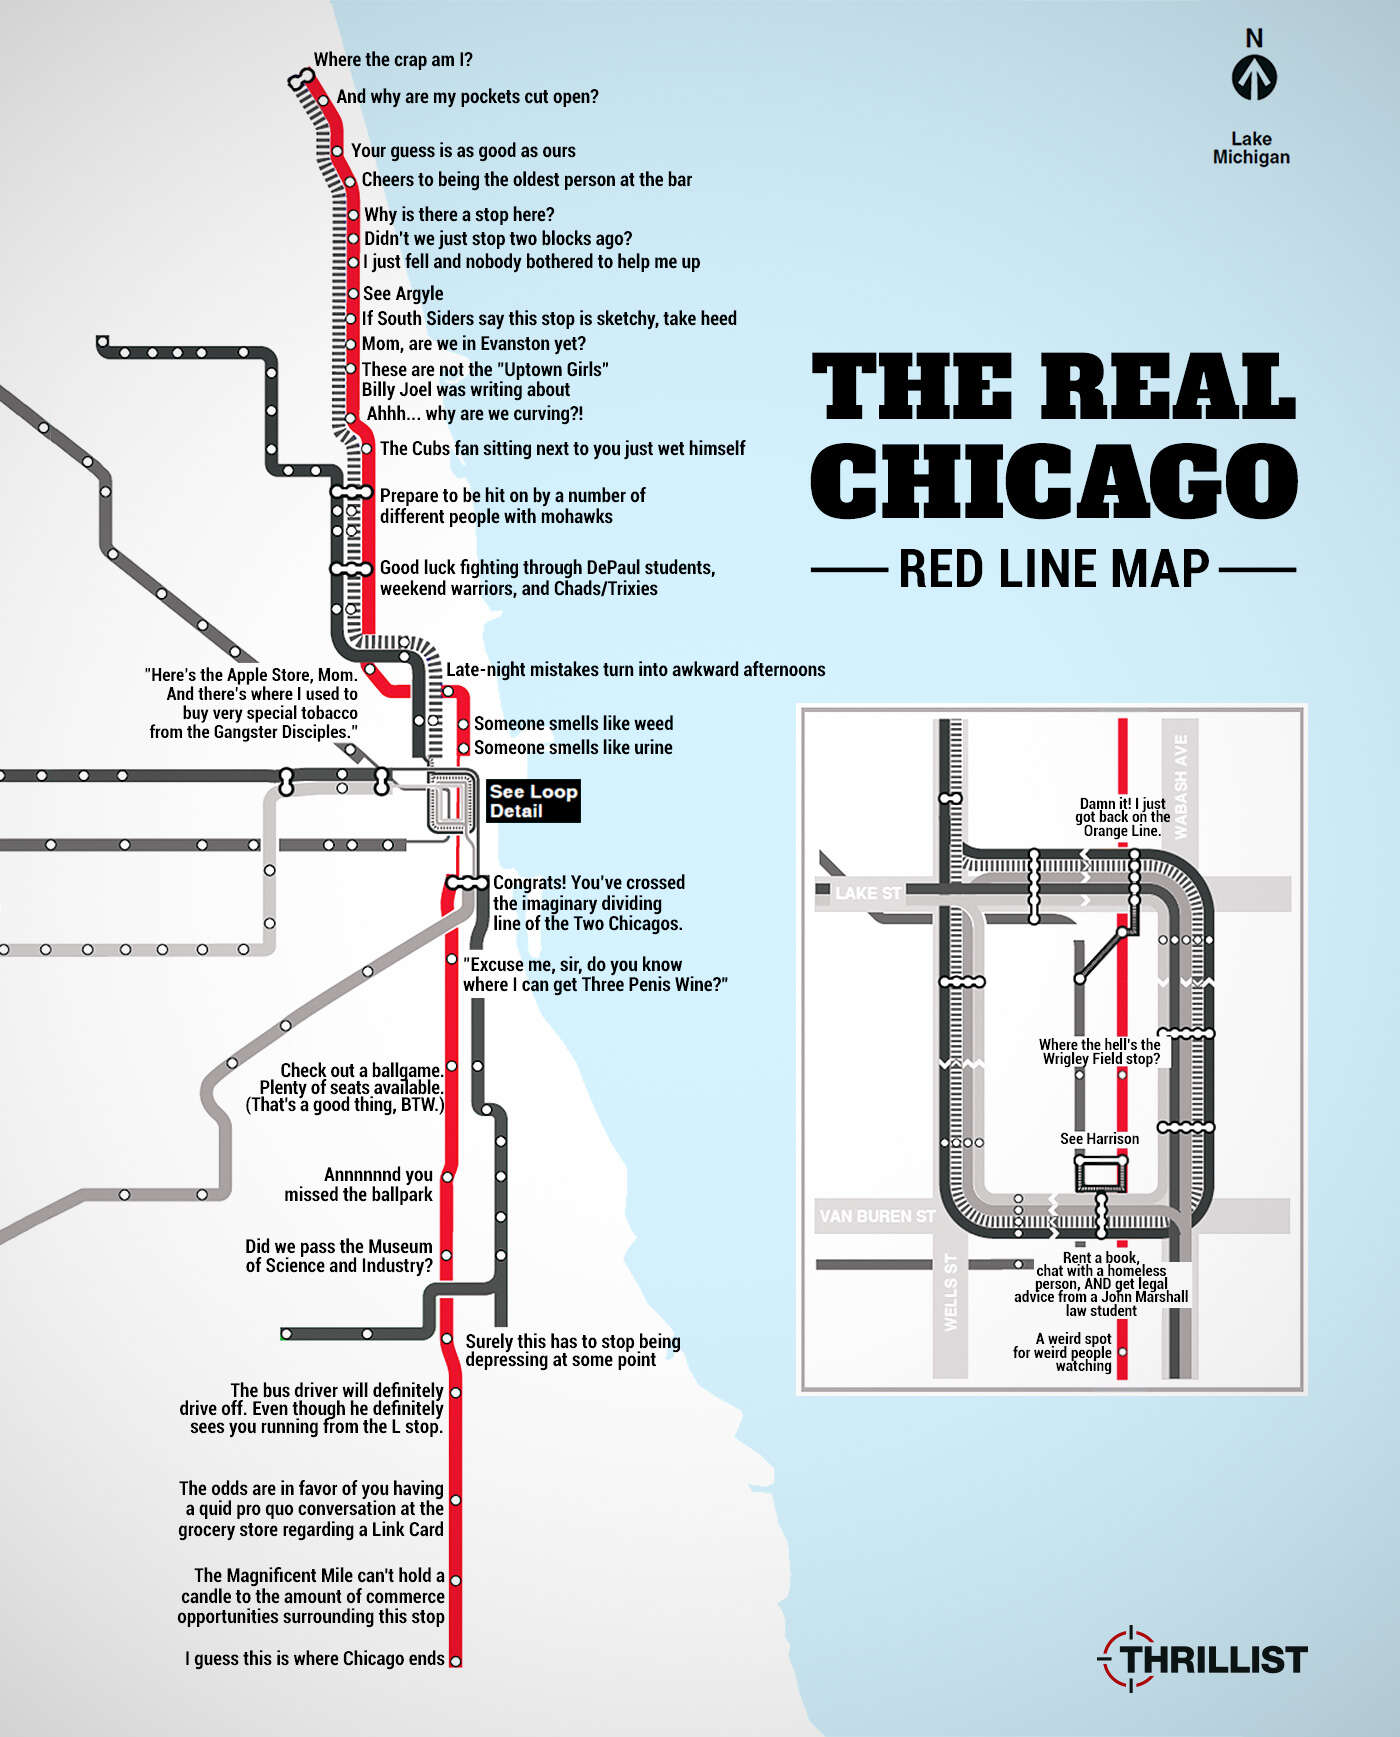 cta red line map